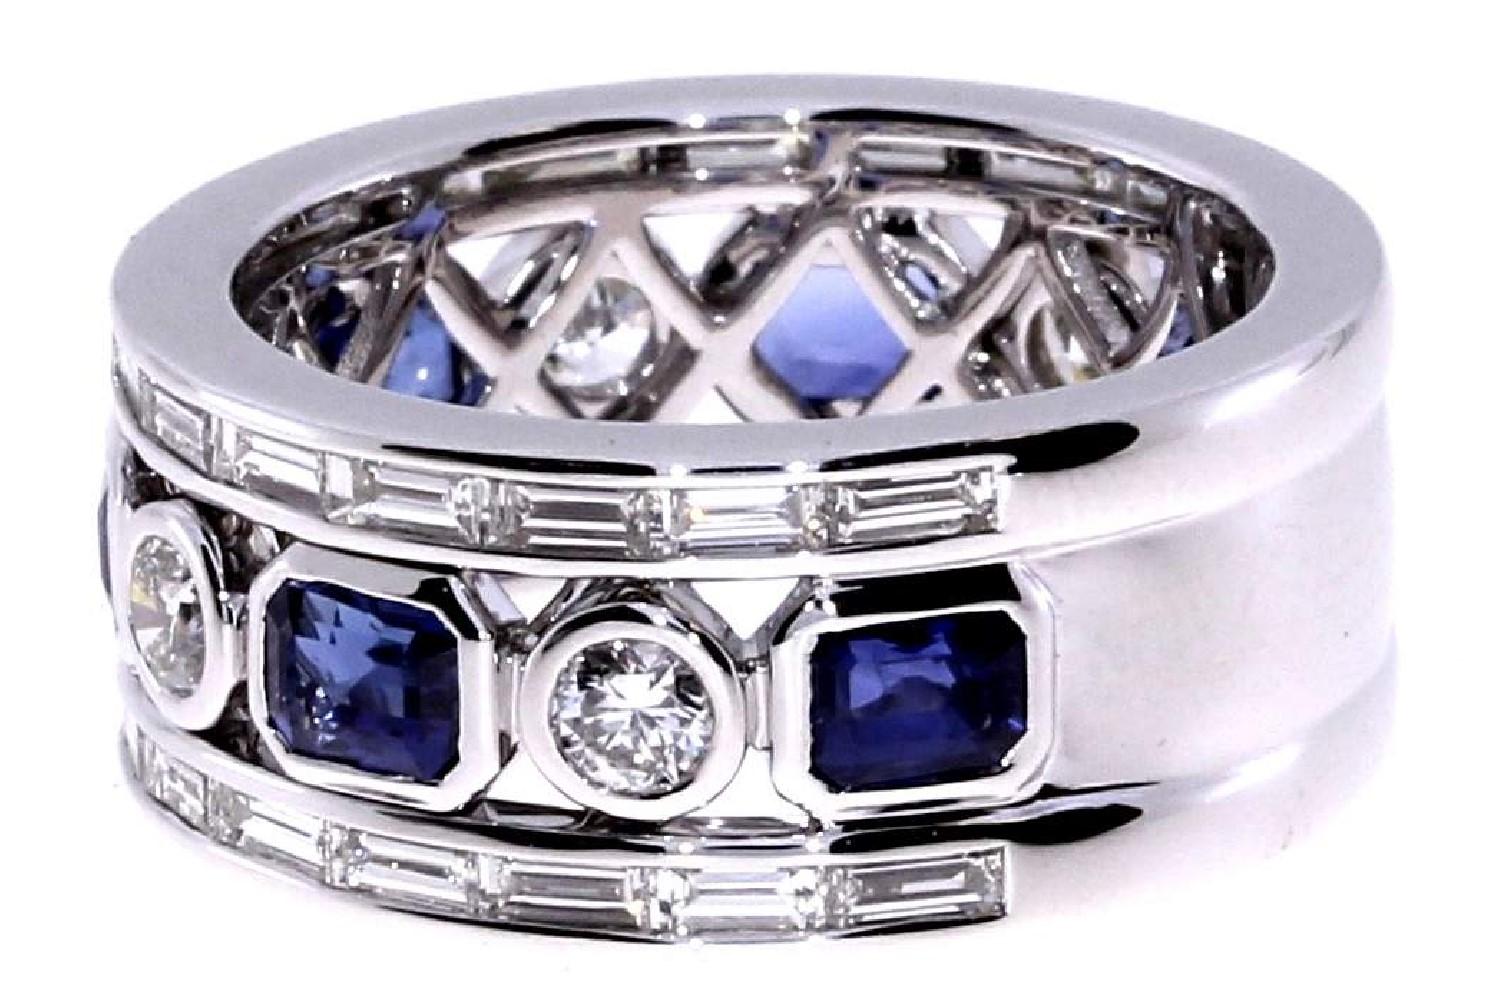 Handmade
18K White Gold
2.08ct of Natural Royal Blue Sapphire
1.82ct of Baguettes and Round Cut Diamonds
G-H Color VS
Designed, Handpicked, & Manufactured From Scratch In Los Angeles Using Only The Finest Materials and Workmanship

